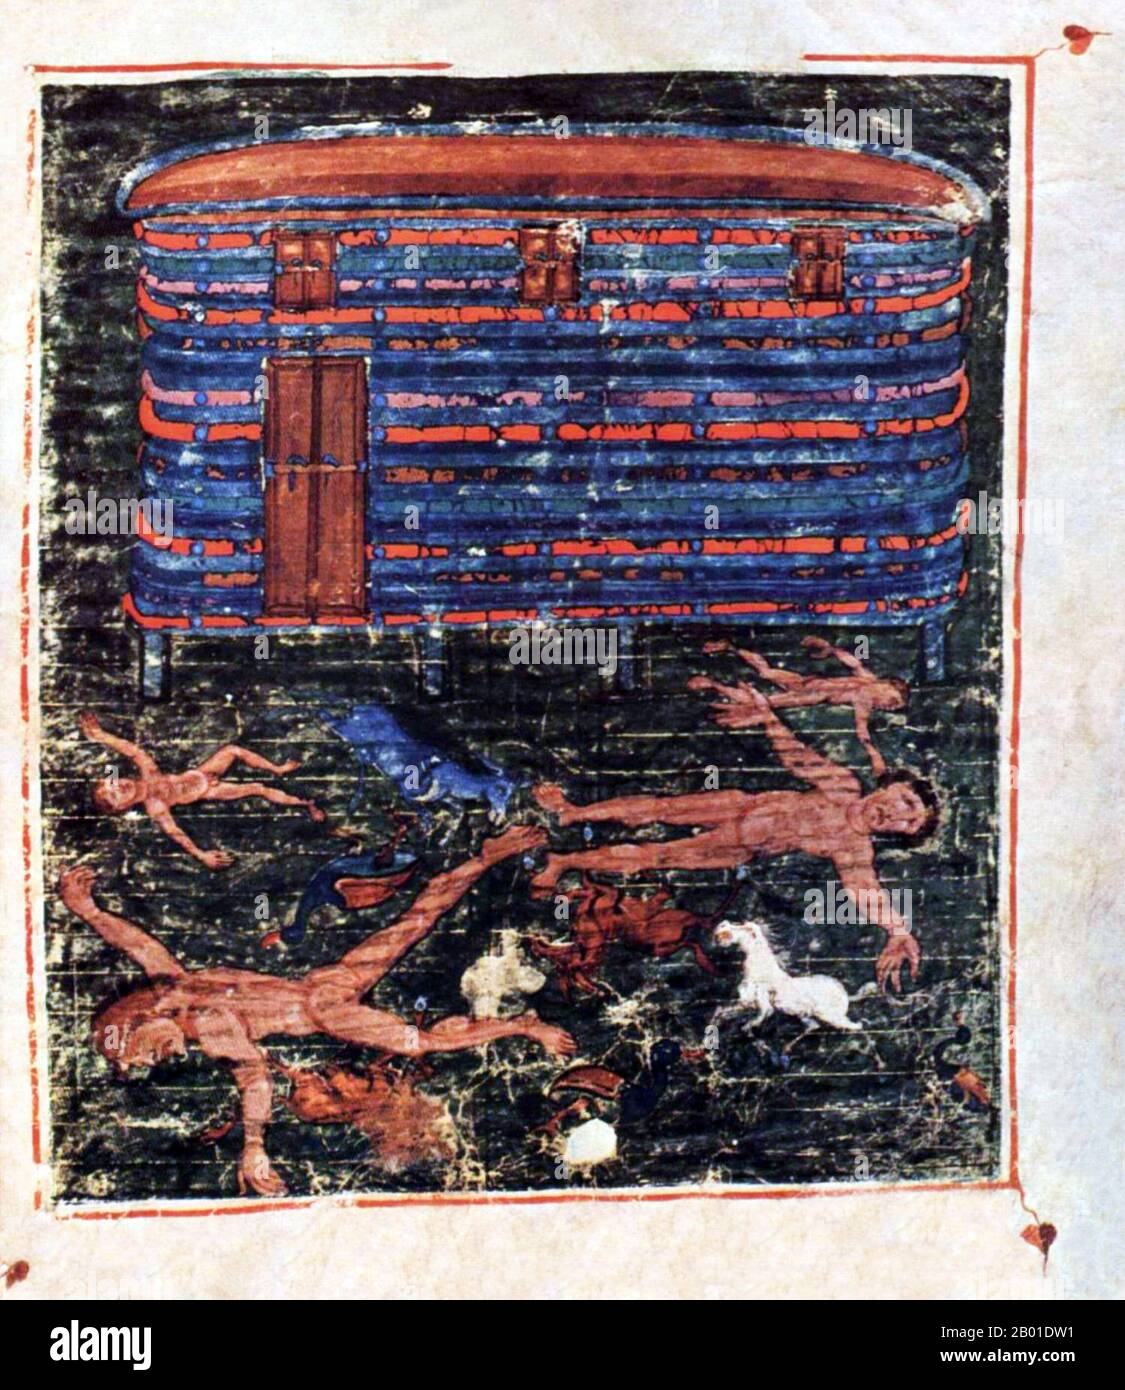 Germany/France: Sintflut - Le Déluge - The Great Flood. Ashburneham Pentateuch Manuscript, 7th century.  Noah (or Noe, Noach) was, according to the Hebrew Bible, the tenth and last of the antediluvian Patriarchs.  The biblical story of Noah is contained in chapters 6-9 of the book of Genesis, where he saves his family and representatives of all animals from the flood by constructing an ark. He is also mentioned as the 'first husbandman' and in the story of the Curse of Ham.  Noah is the subject of much elaboration in later Abrahamic traditions. Noah is also mentioned several times in the Quran Stock Photo